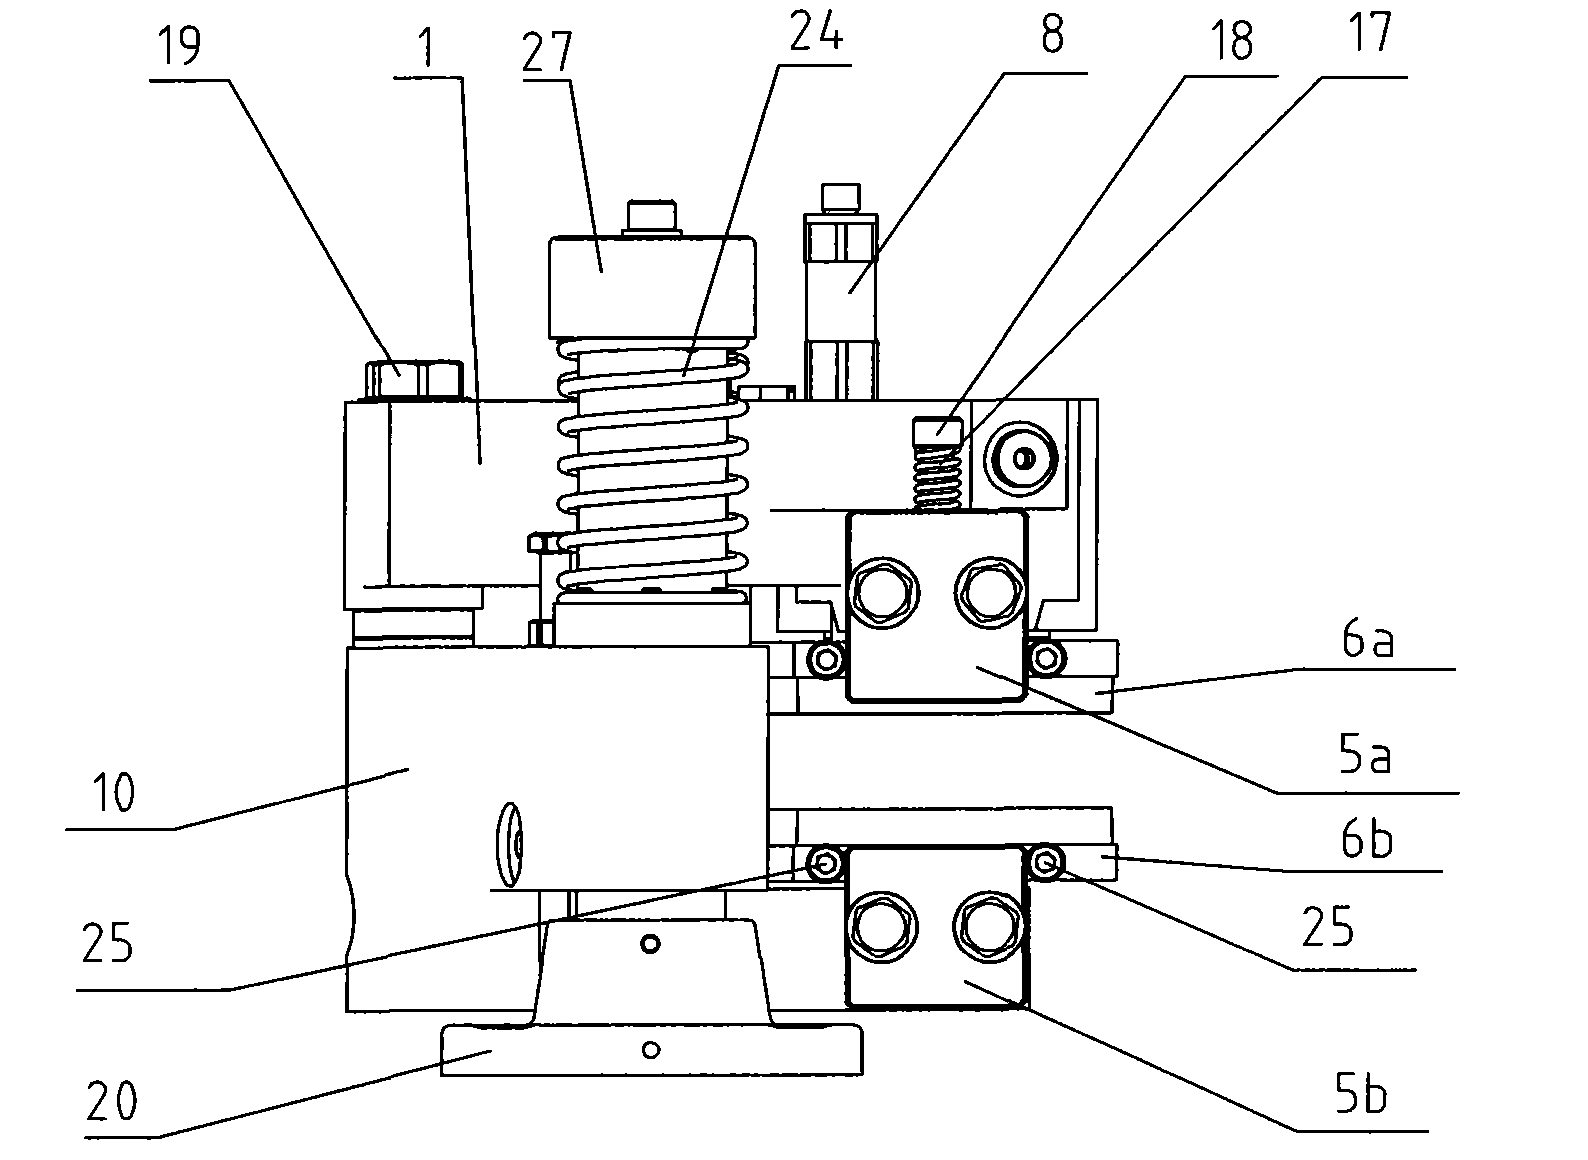 Brake caliper assembly of normally open type wind driven generator main shaft system